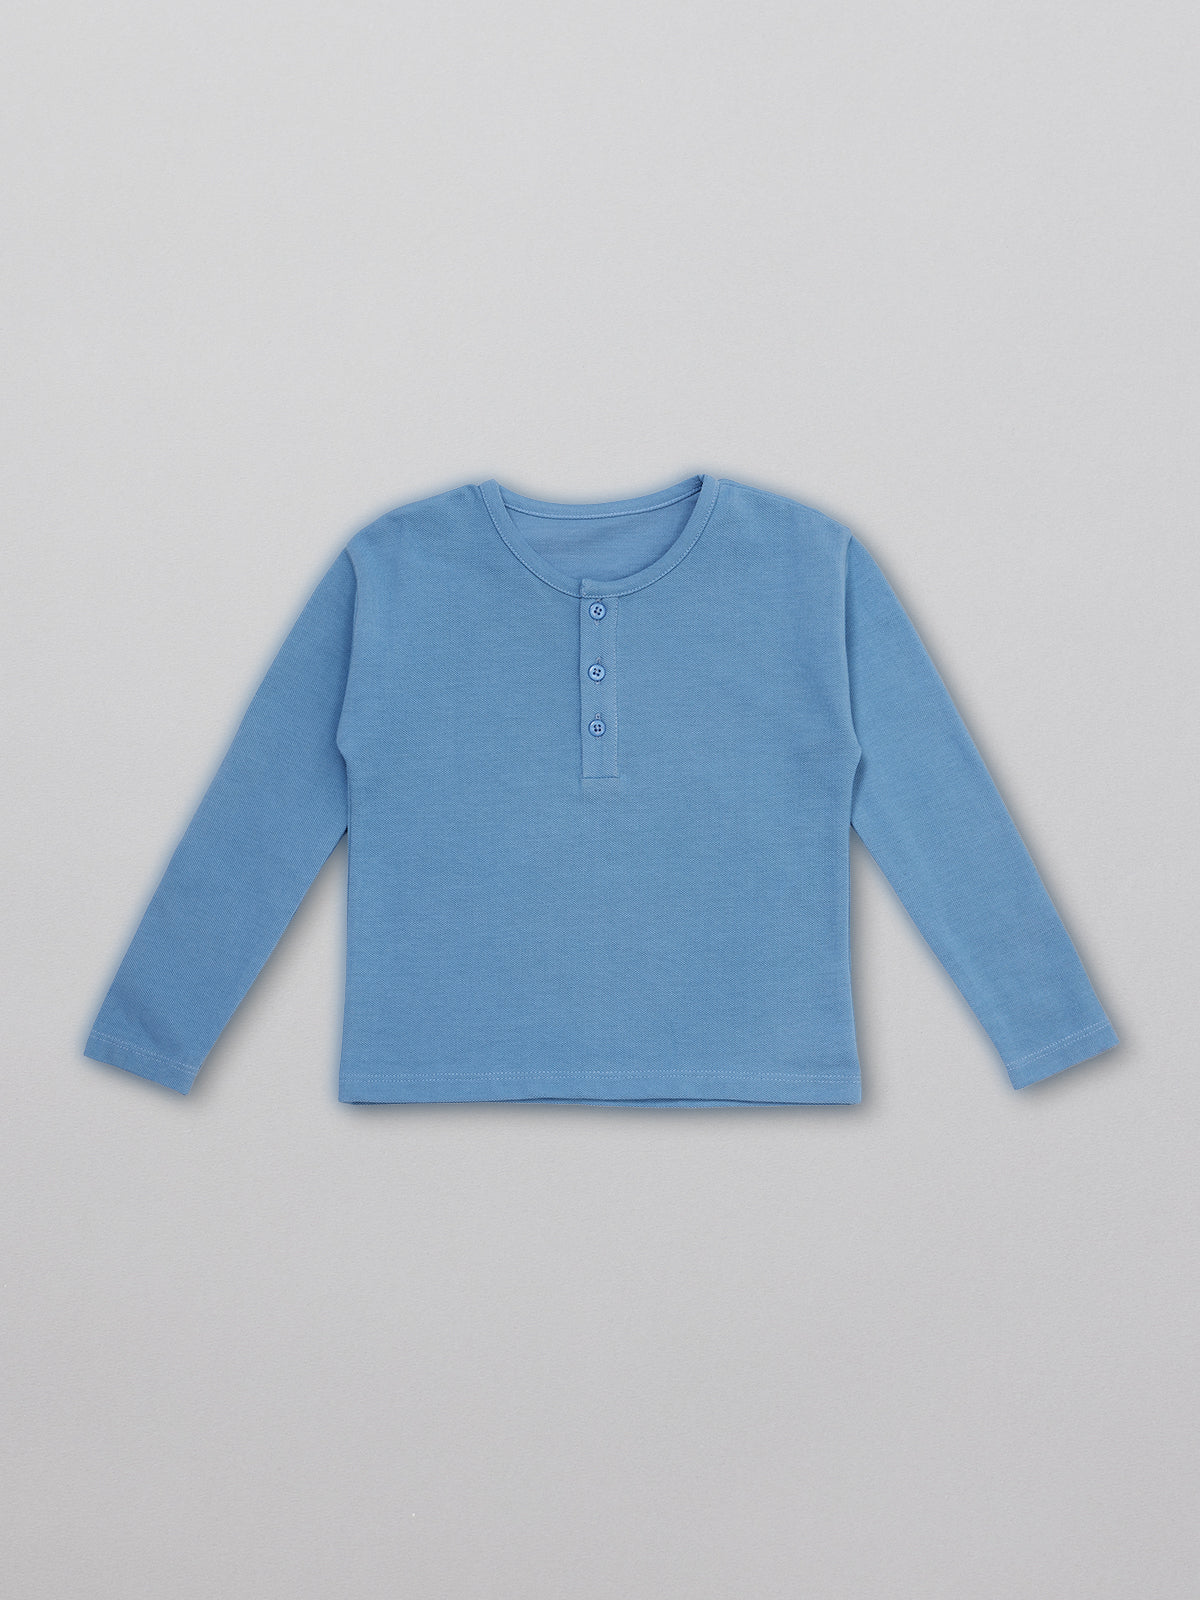 Sustainable kids pique t-shirt in blue with buttons, pictured from the front.